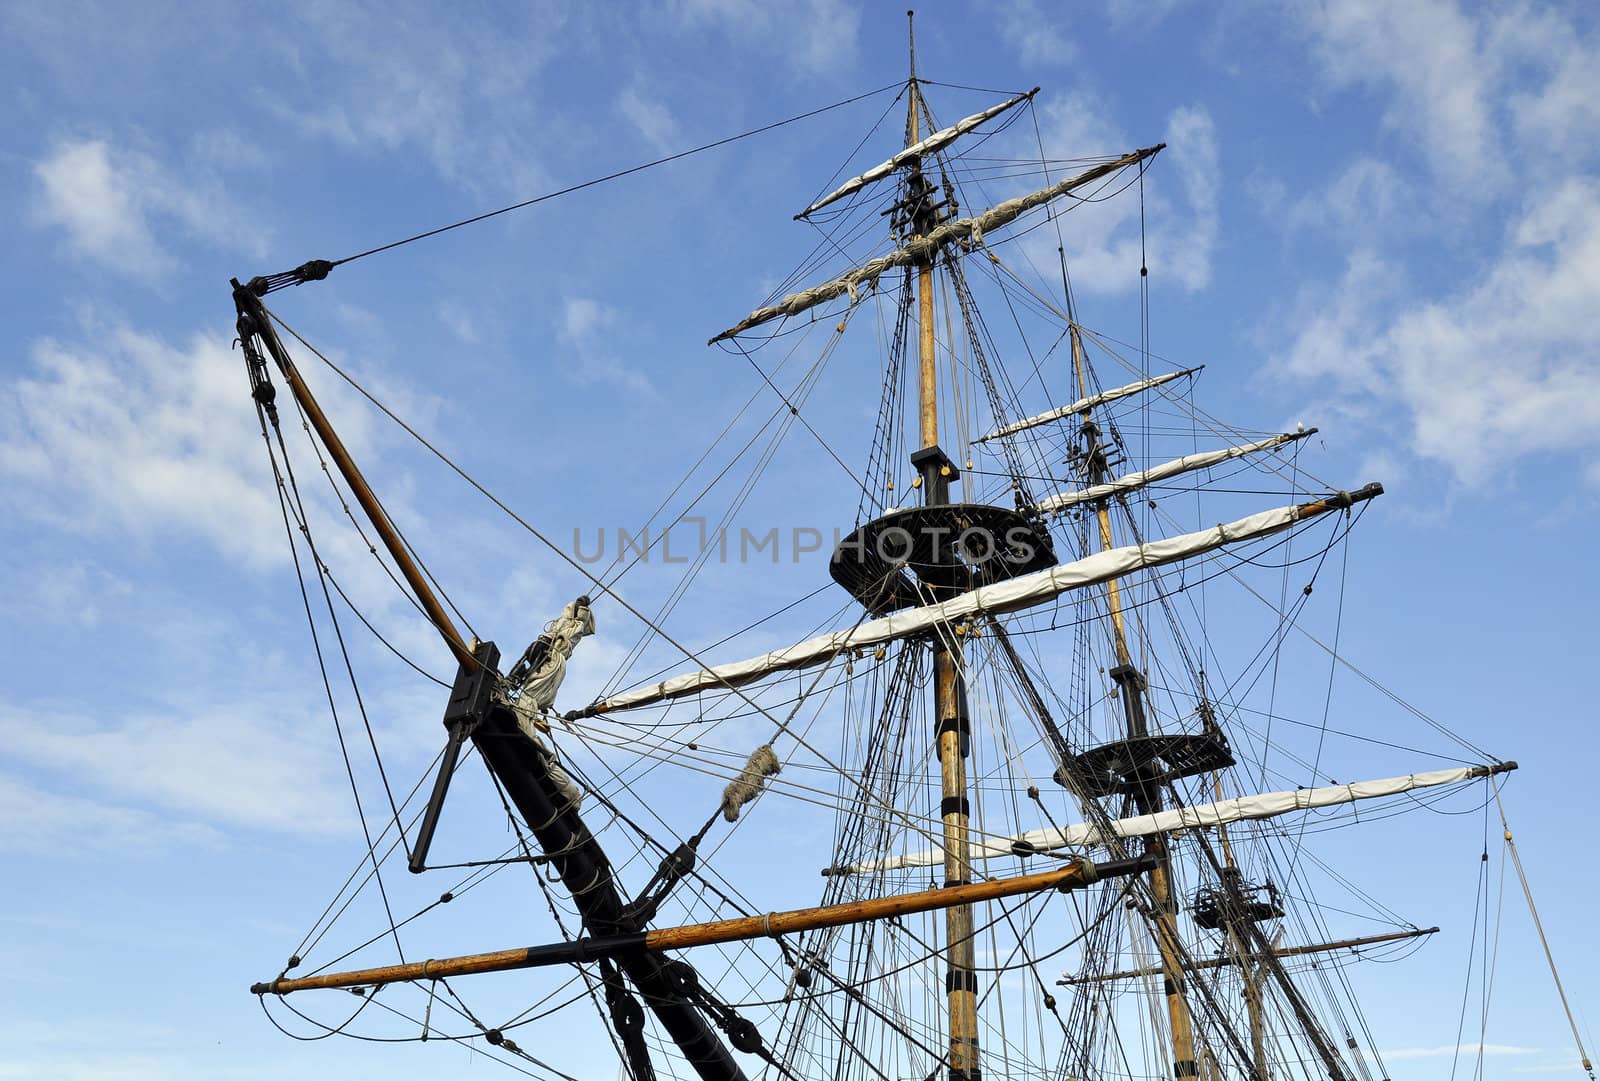 Landscape view of tall ship rigging against blue cloudy sky